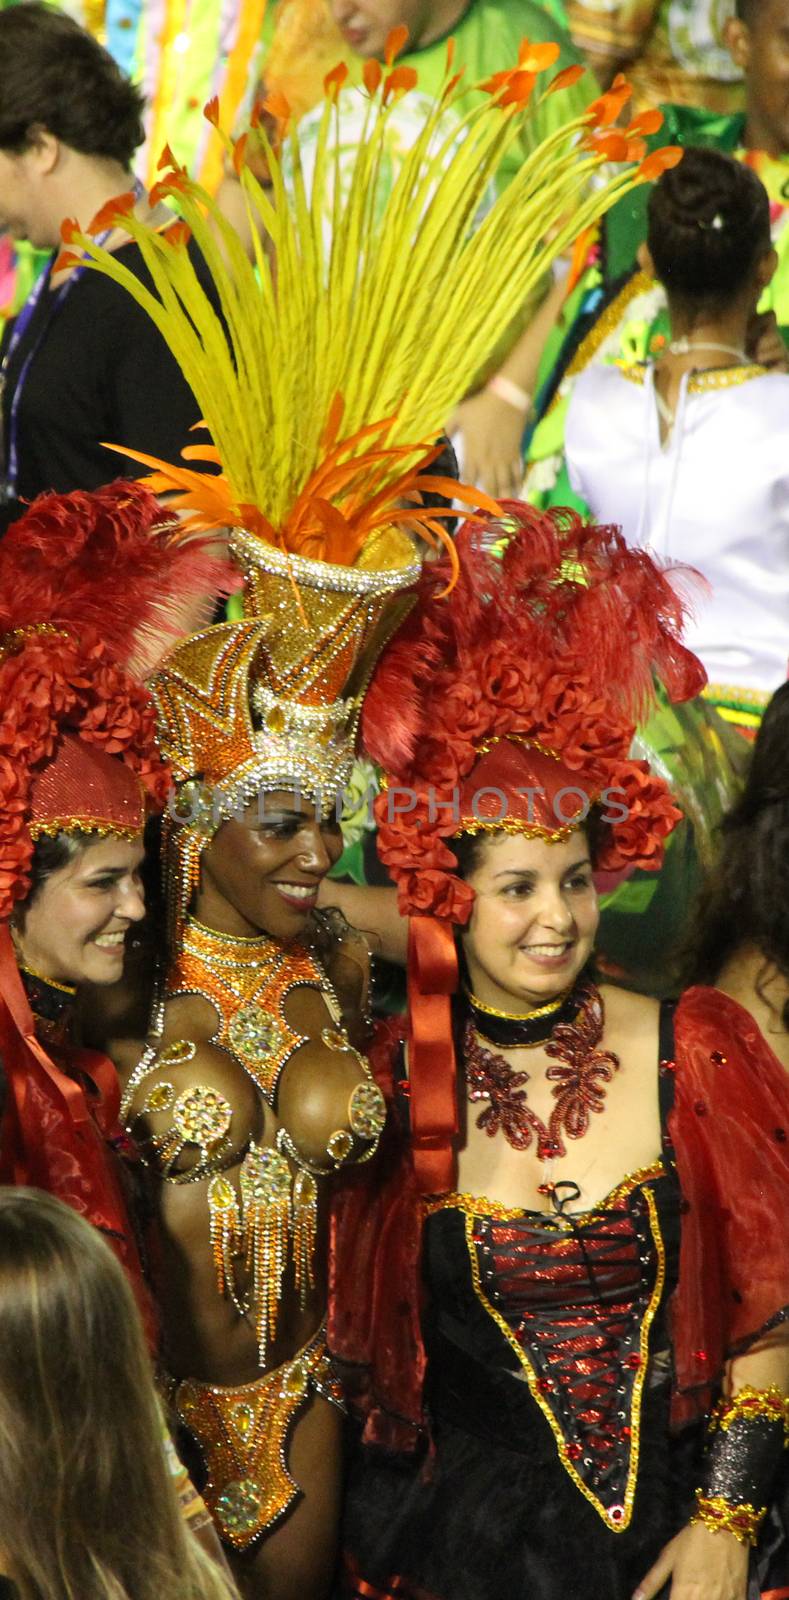 Entertainers posing for photos at a carnaval in Rio de Janeiro, Brazil
02 Mar 2014
No model release Editorial only